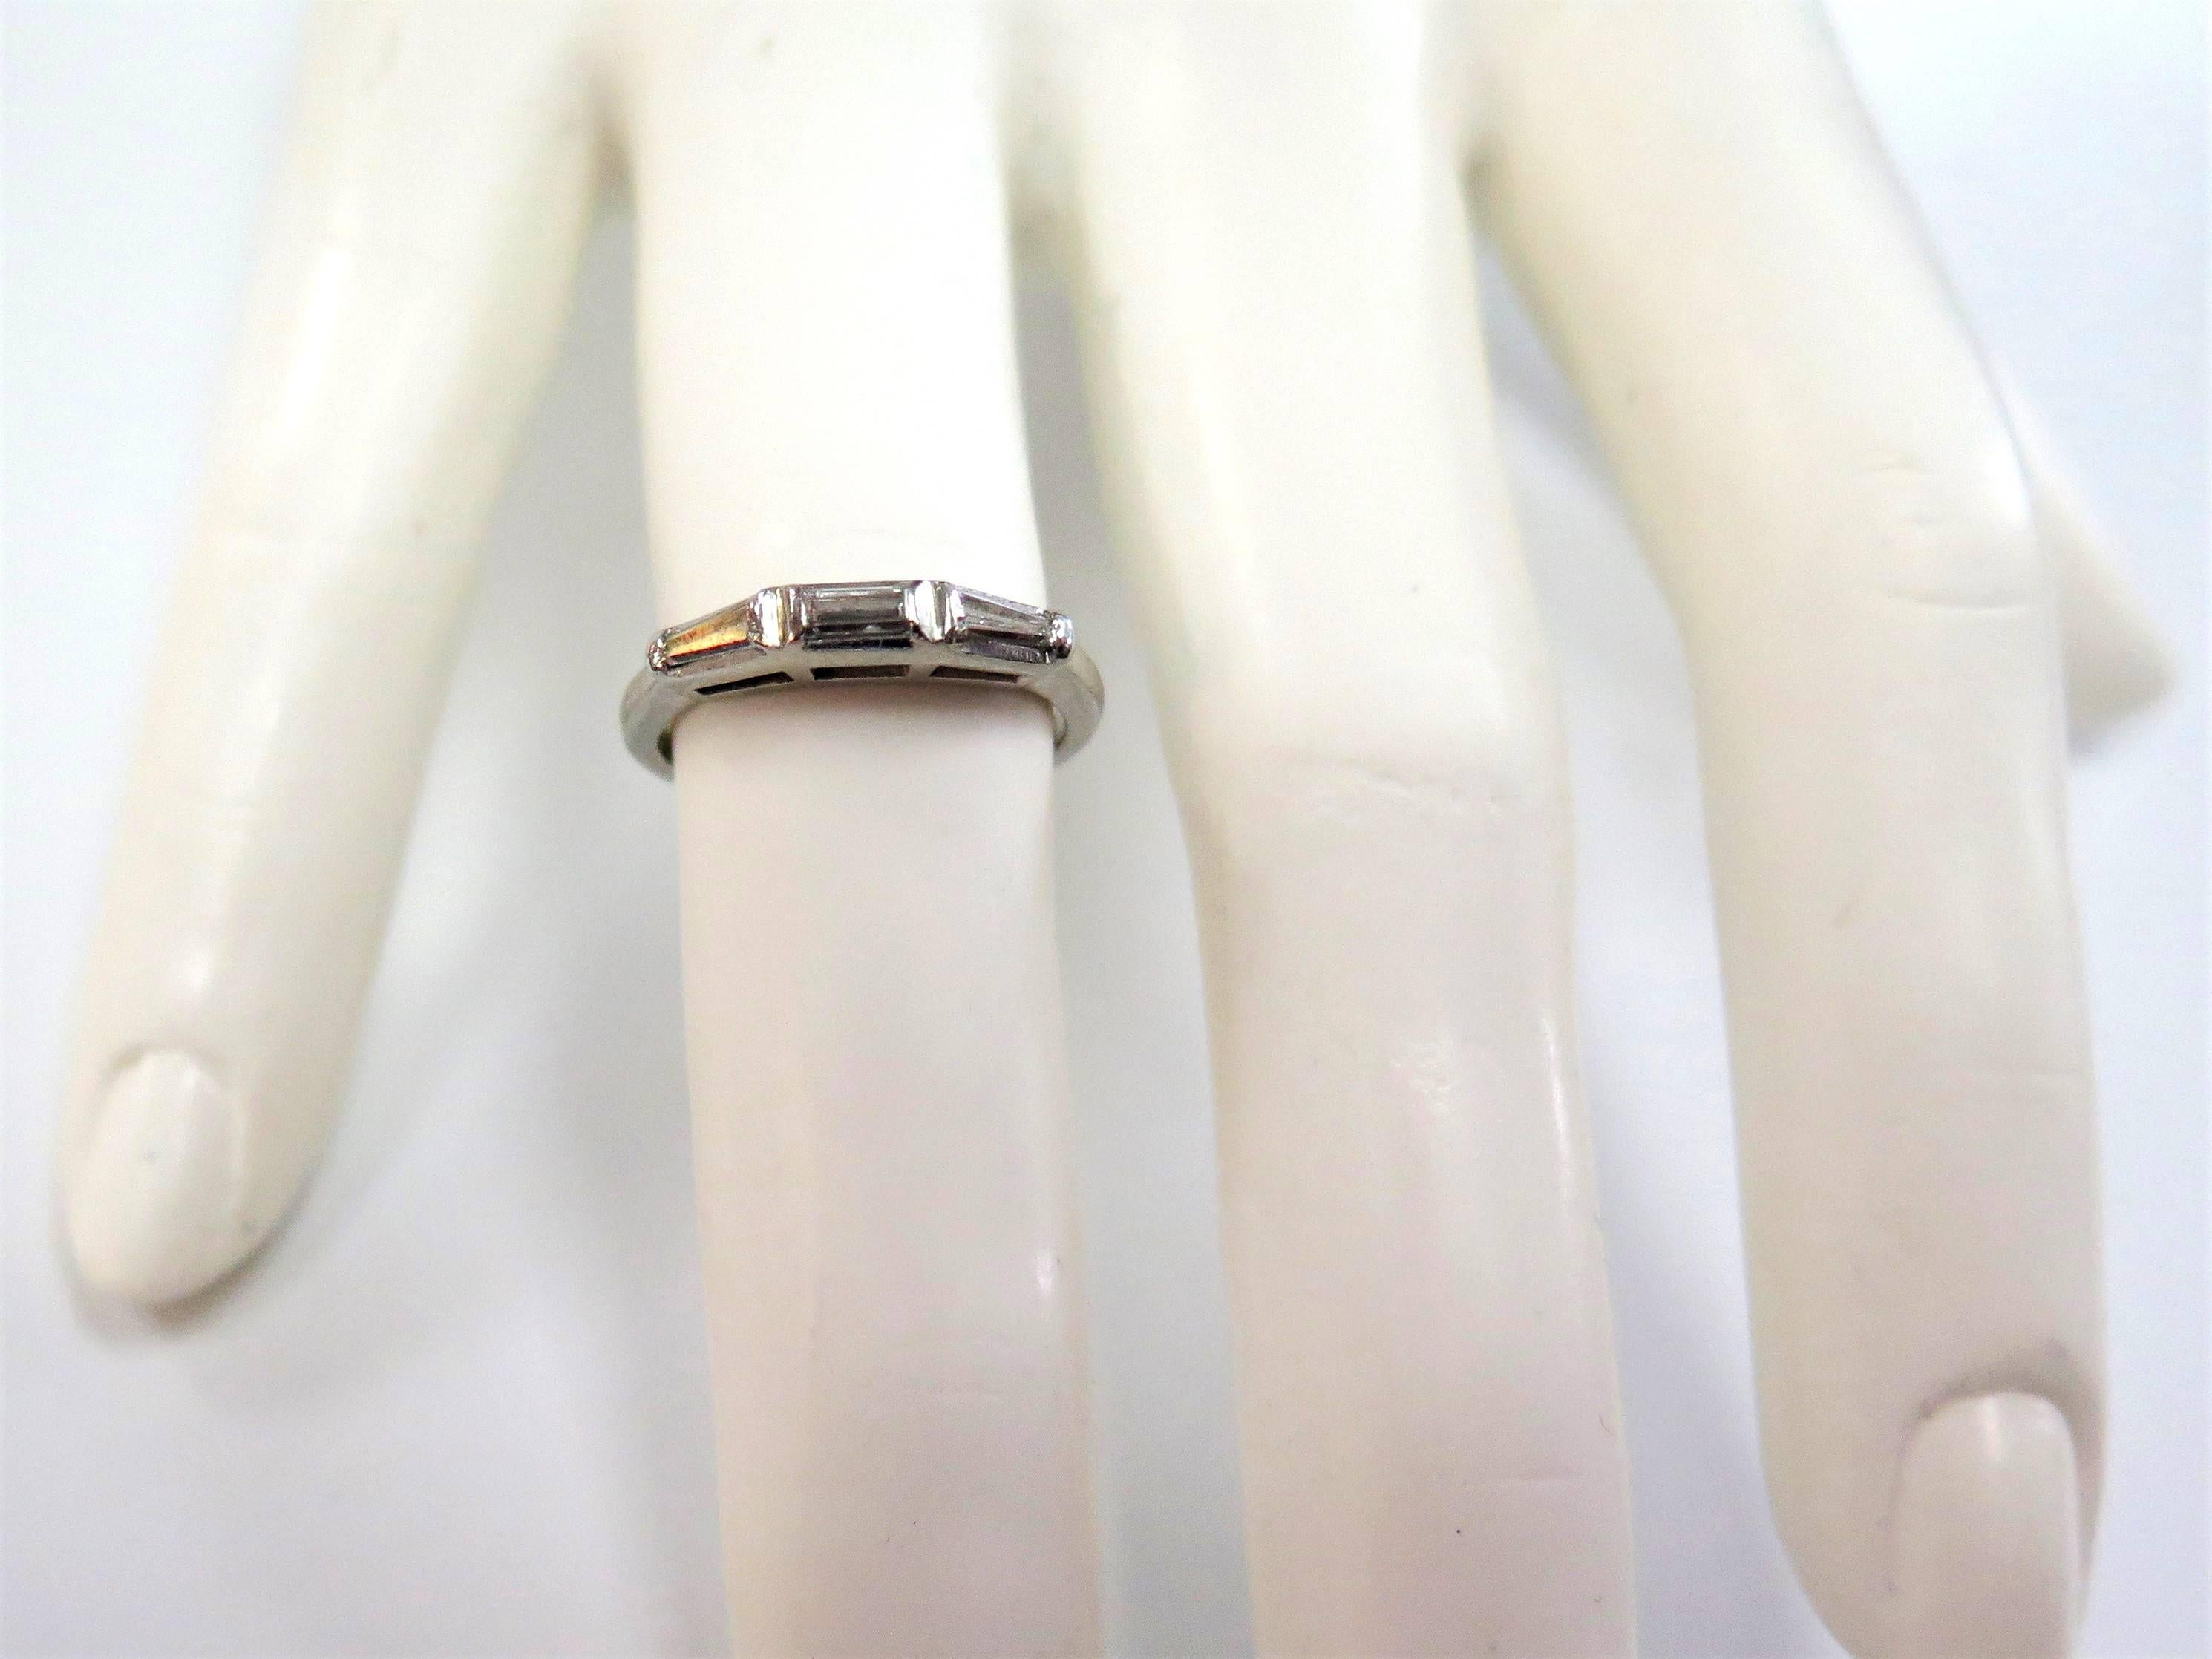 Women's Vintage Platinum Wedding Band with Three Baguettes, 1940s